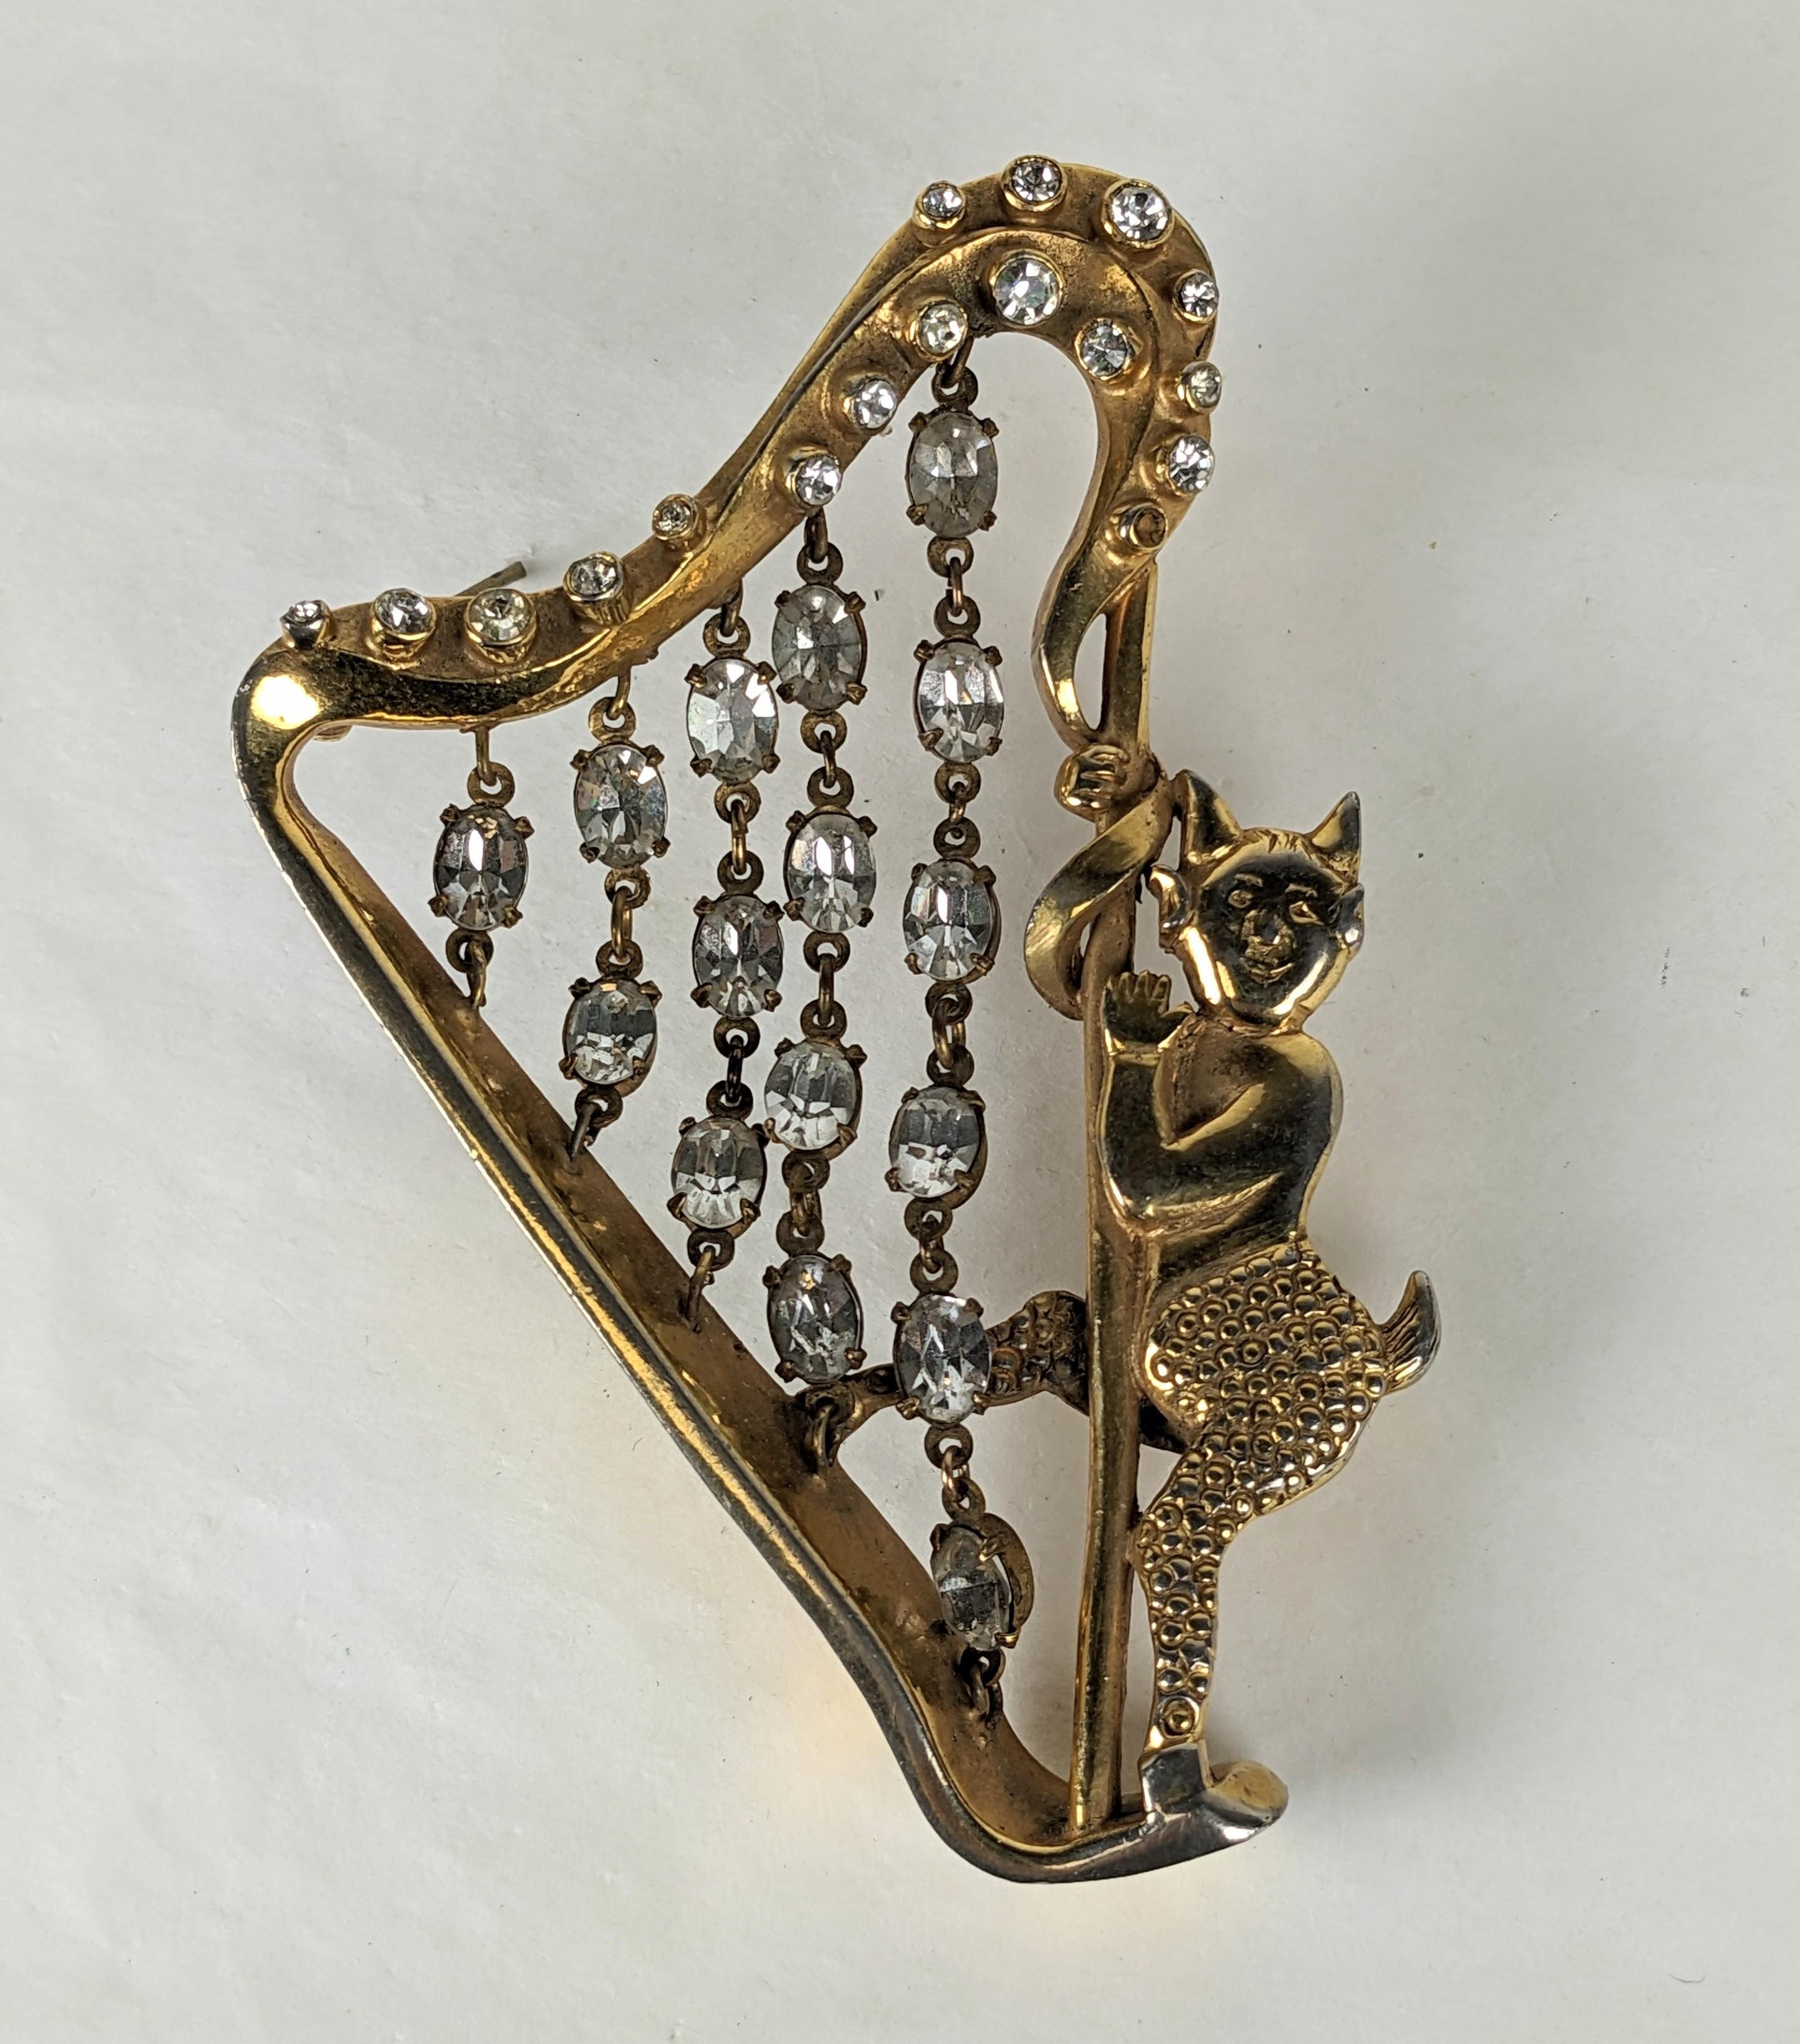 Charming Hattie Carnegie Mischievious Devil playing Jeweled Harp Strings brooch from the Art Deco era. Novelty brooches were all the rage in the 1930's and 40's and Hattie Carnegie created many iconic designs. 
This piece is unsigned. Super rare and